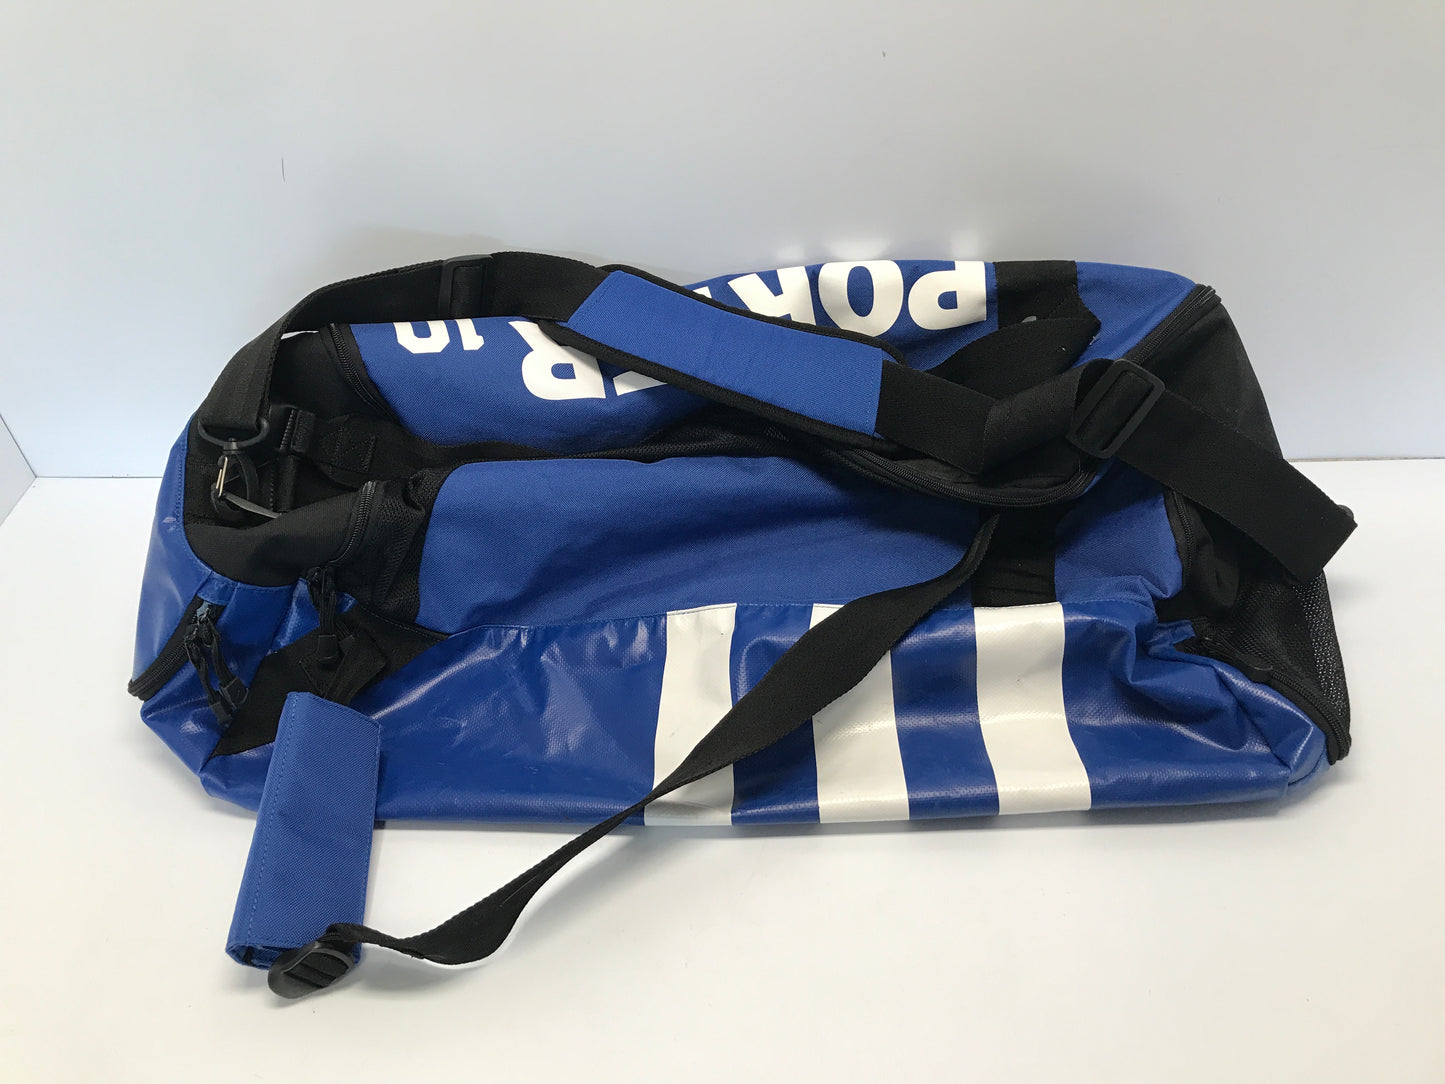 Adidas Porter 10 Sports Gear Gym Bag 28 inch Large Double Sided Perfect Zippers Vinyl and Poly  Excellent Quality